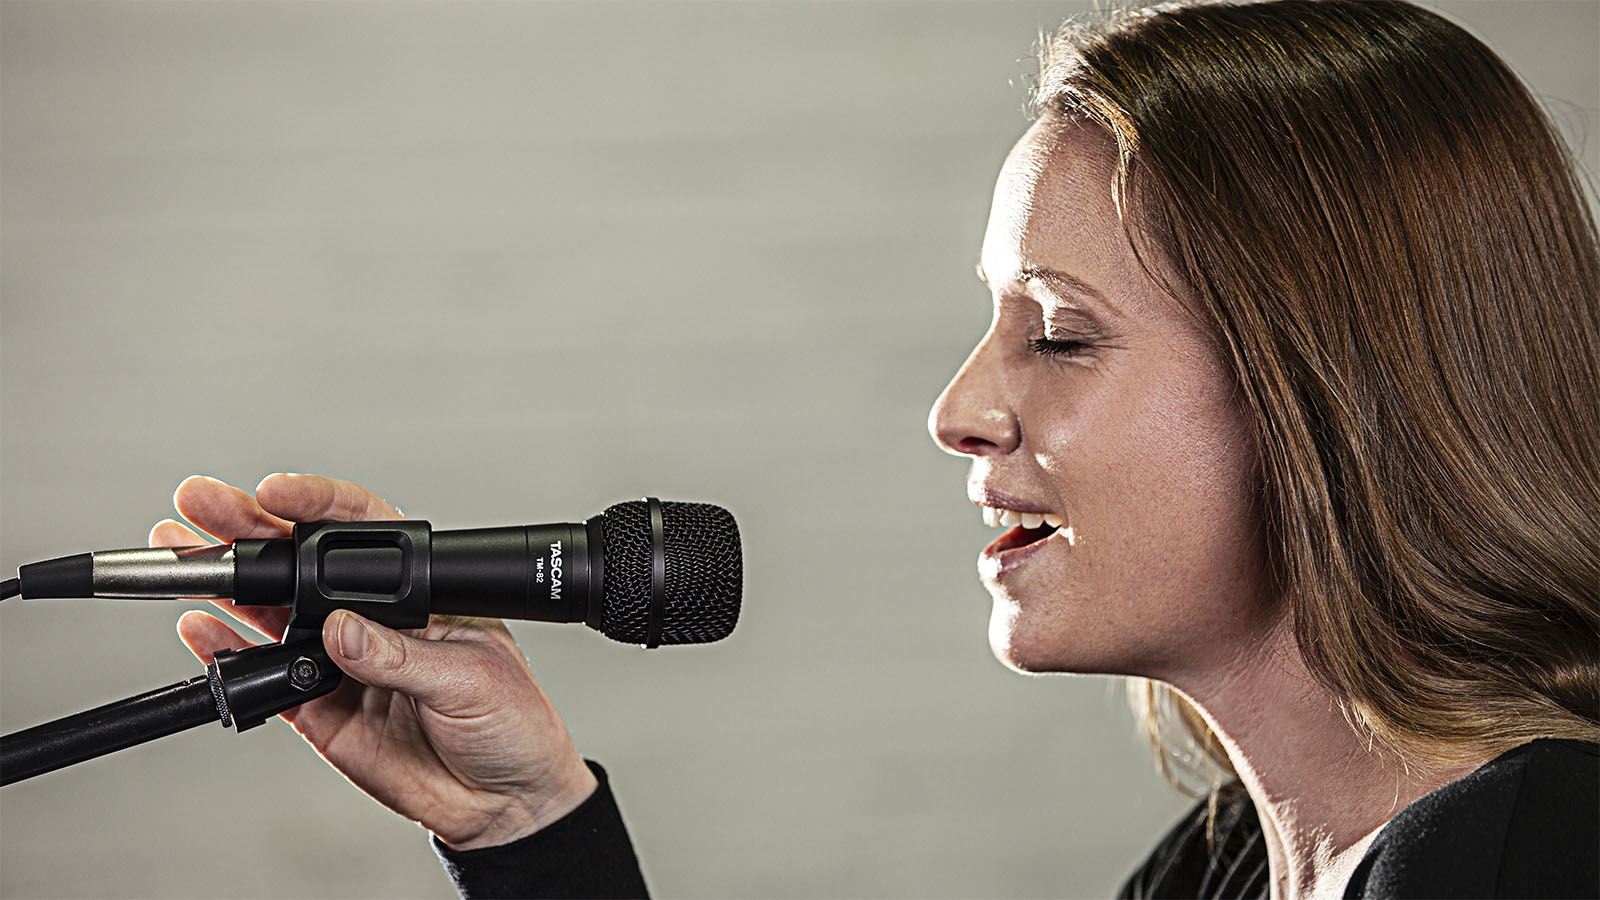 Engineer-Voiced Vocal and Instrument Microphone at a Working Performer's Budget